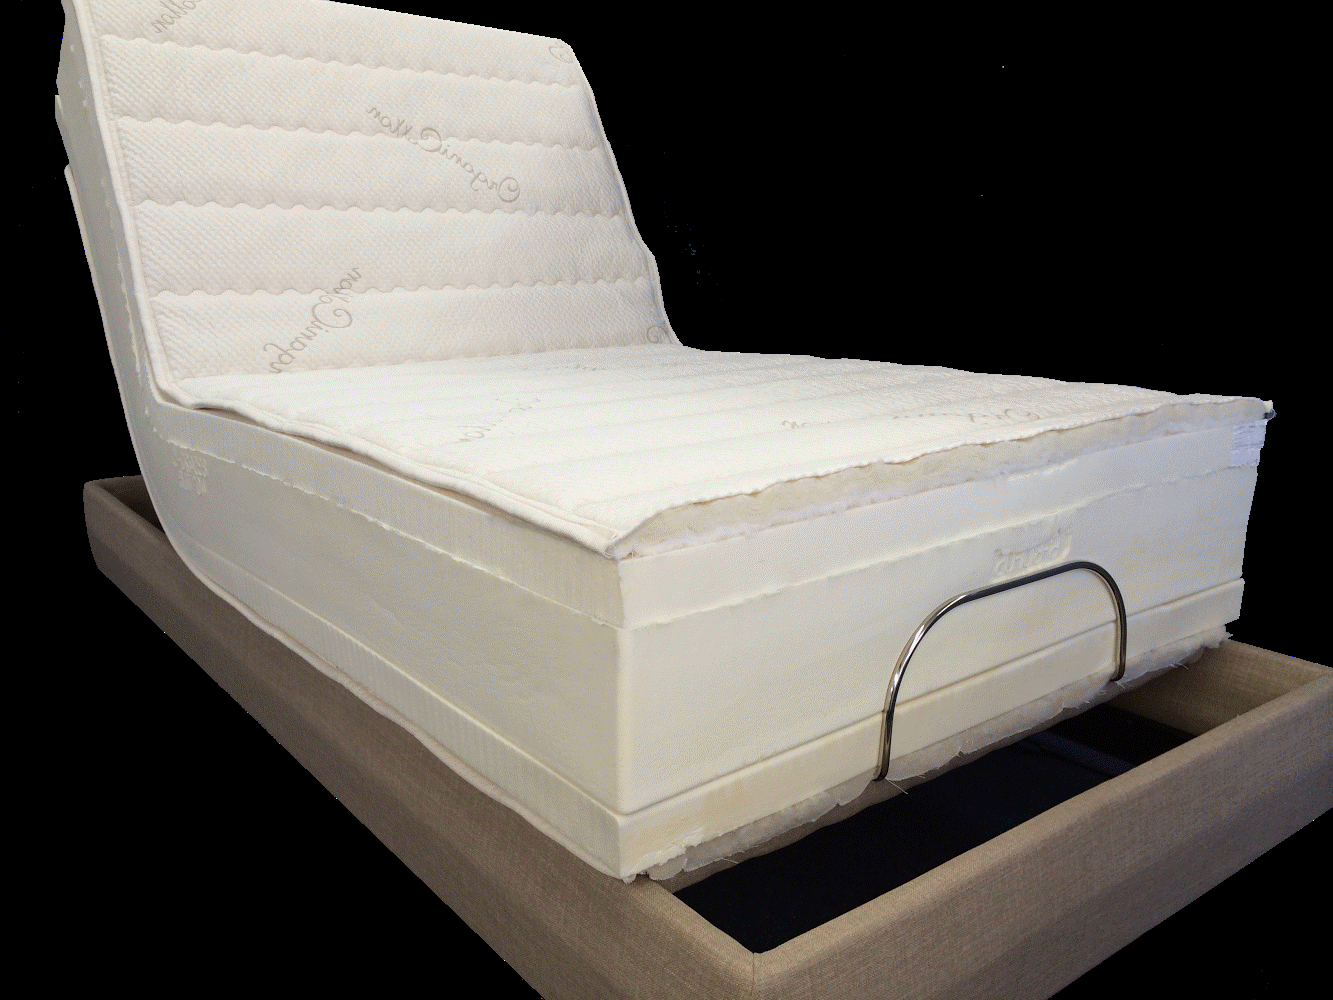 THE ULTIMATE in LA Corona no toxin latex-pedic natural organic pure certified chemical free cotton and wool adjustable bed mattresses